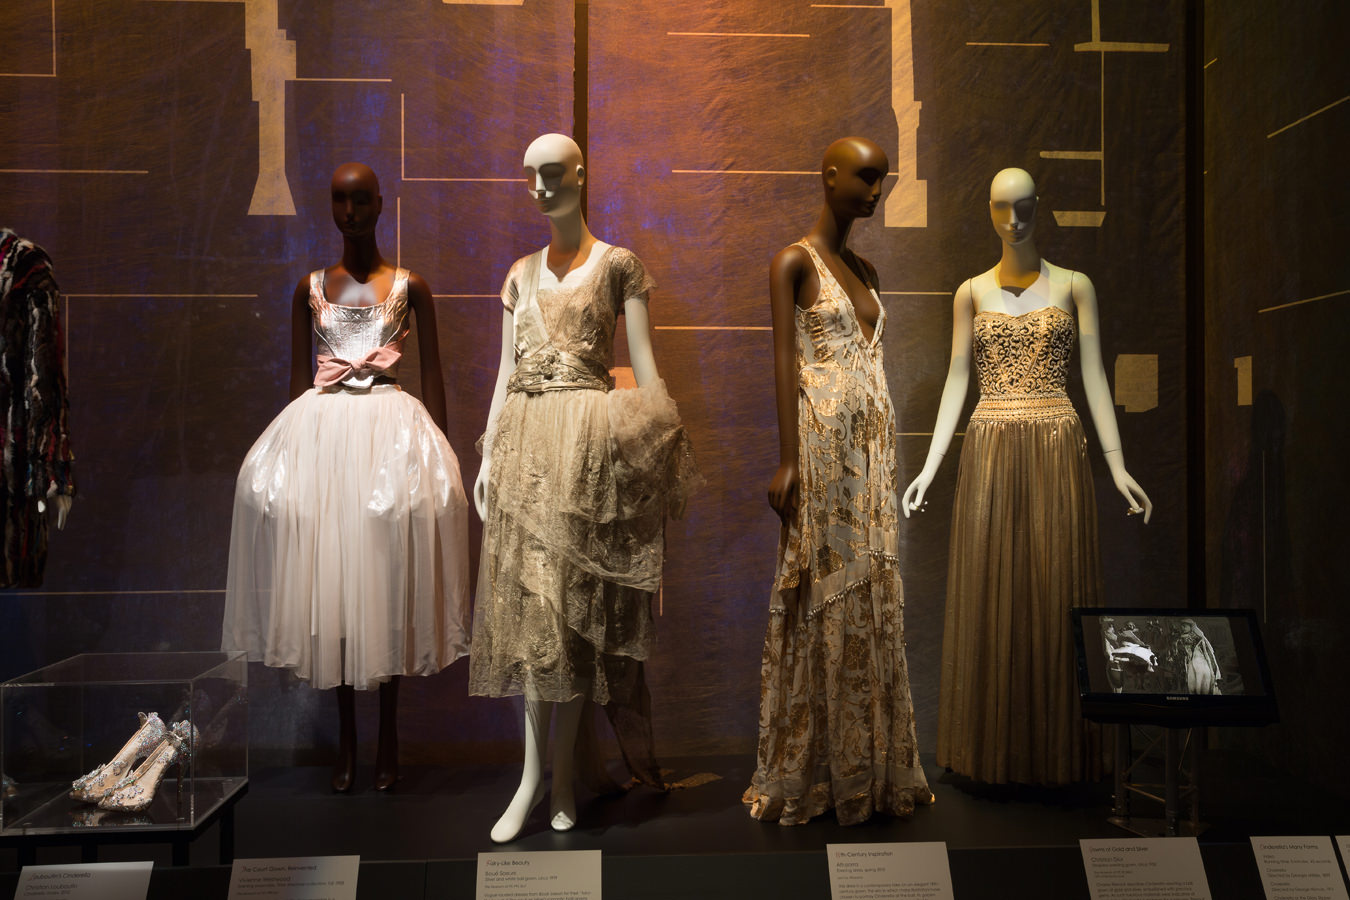 Fairy Tale Fashion at the Museum at the Fashion Institute of Technology, Daily Edit